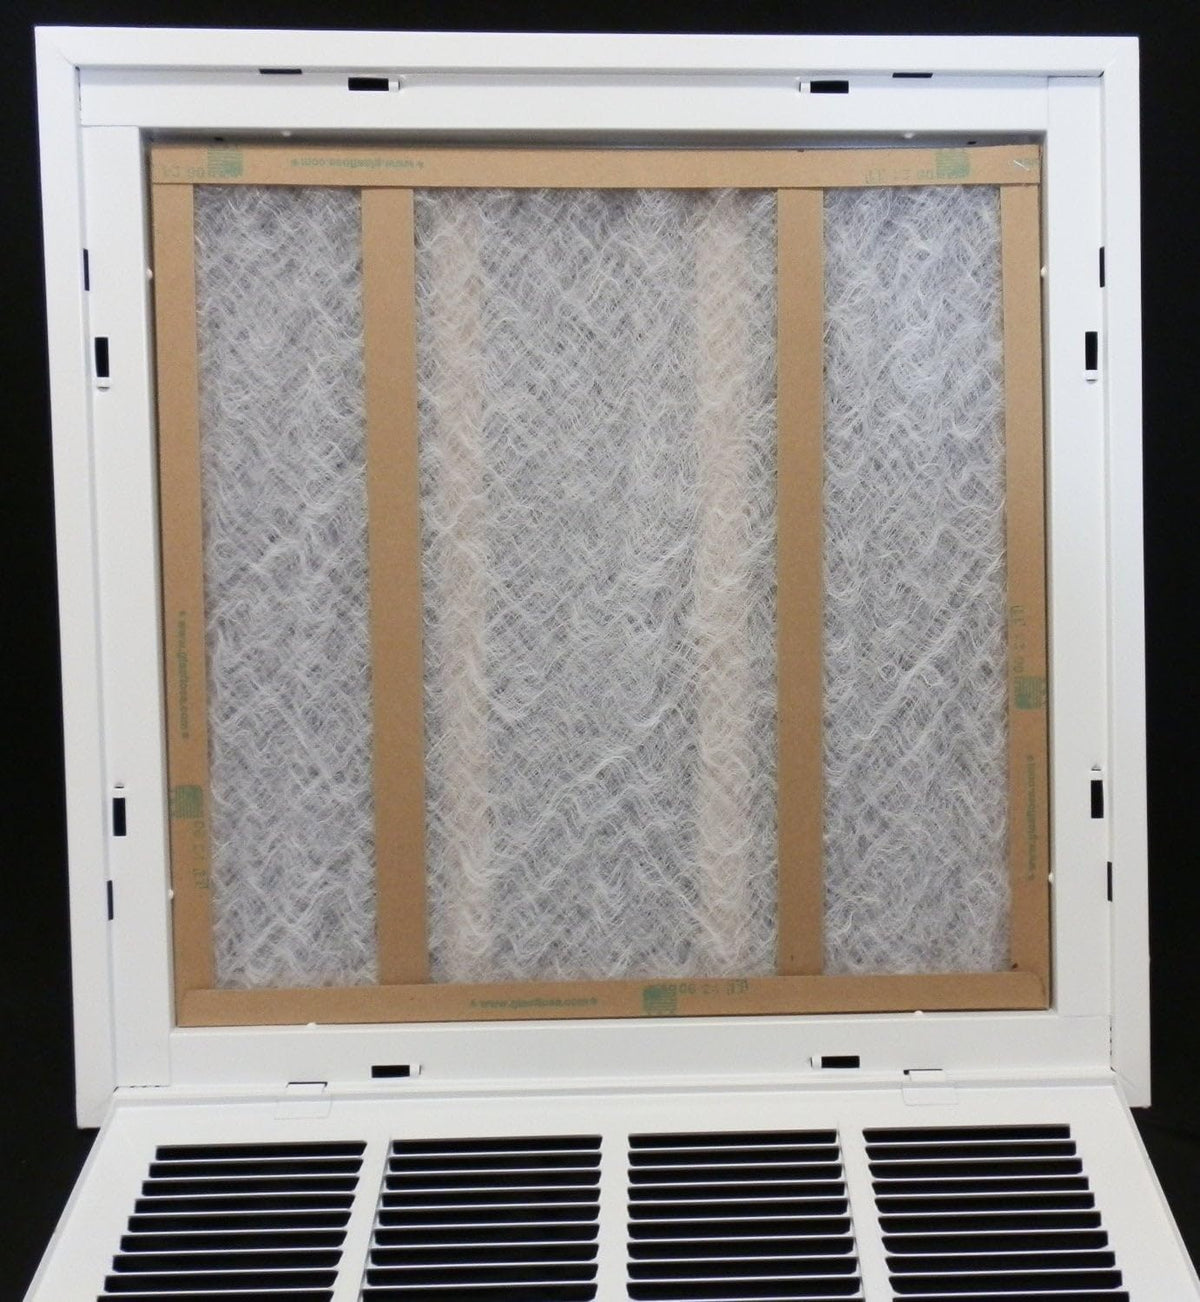 20&quot; X 50&quot; Steel Return Air Filter Grille for 1&quot; Filter - Removable Frame - [Outer Dimensions: 22 5/8&quot; X 52 5/8&quot;]